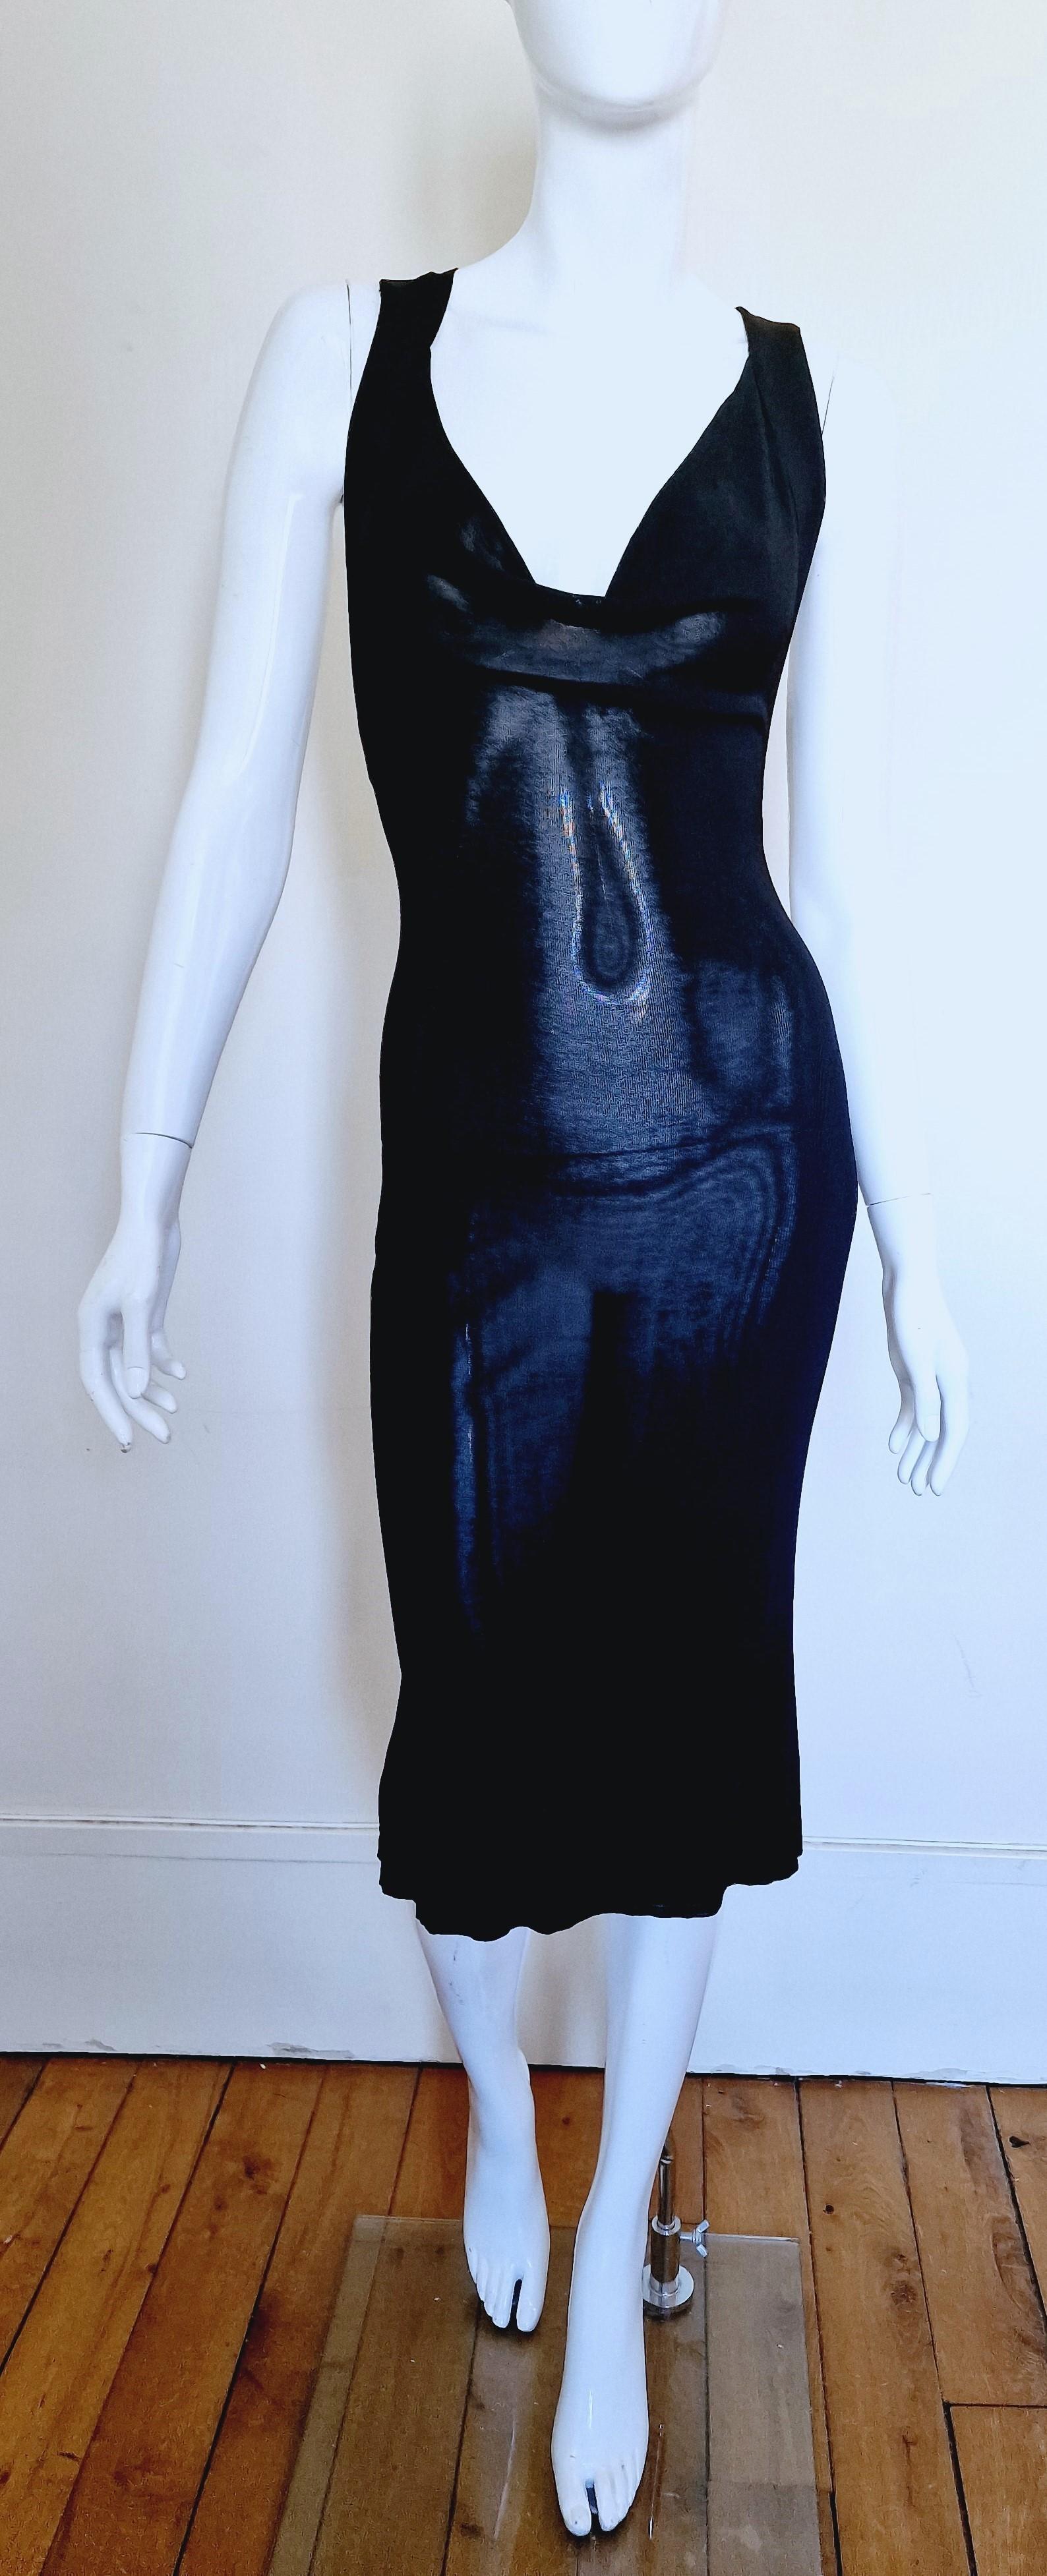 Bondage back dress by Alexander McQueen!
Wonderful silhouette.

EXCELLENT condition!

SIZE
Stretchy fabric!
Marked size: small.
It fits from small to medium.
Length: 109 cm / 42.9 inch
Bust: 34 cm / 13.4 inch
Waist: 27 cm / 10.6 inch
Hips: 40 cm /